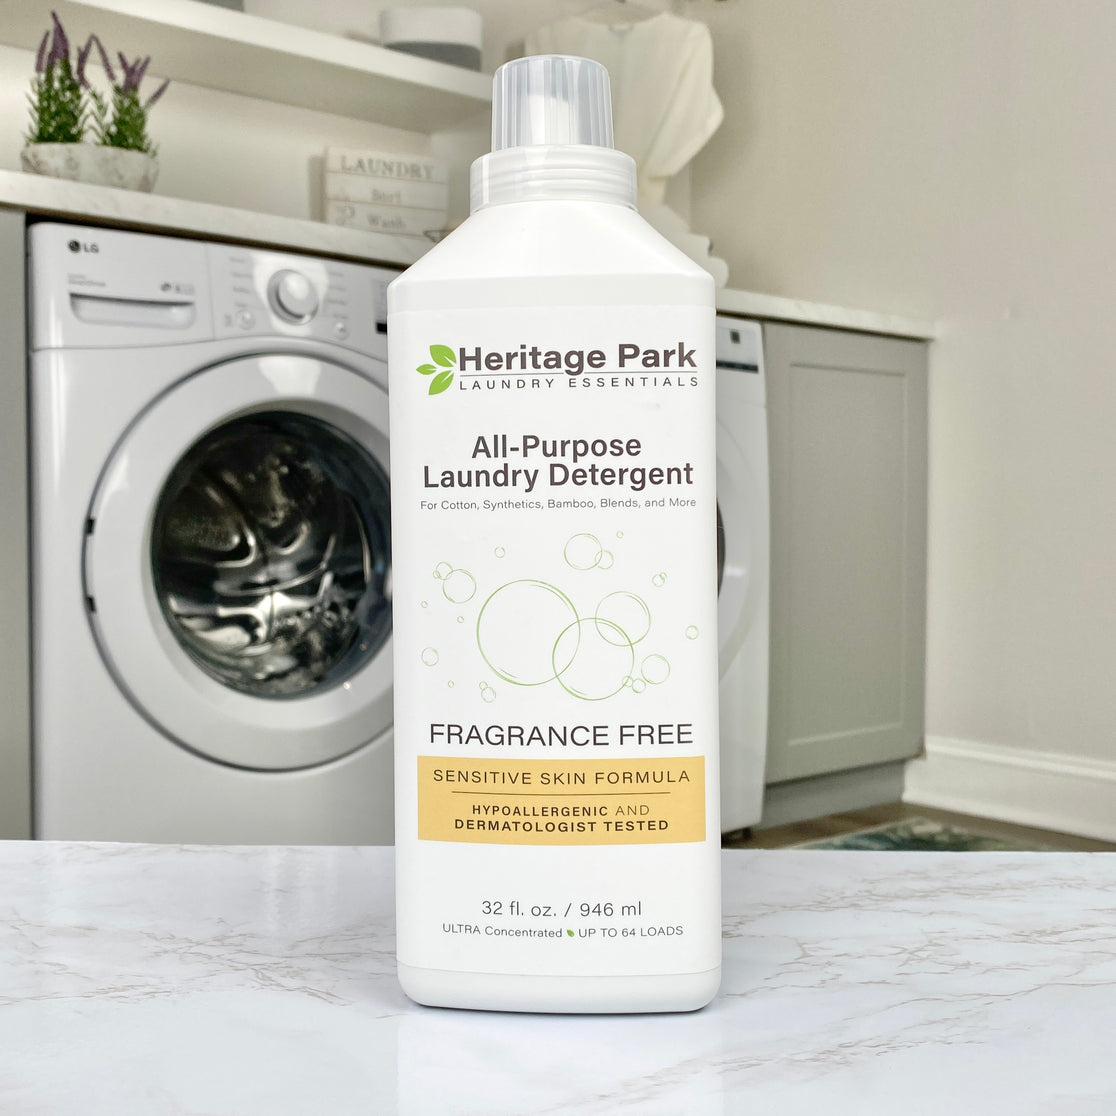 Heritage Park All-Purpose Luxury Laundry Detergent - Fragrance Free